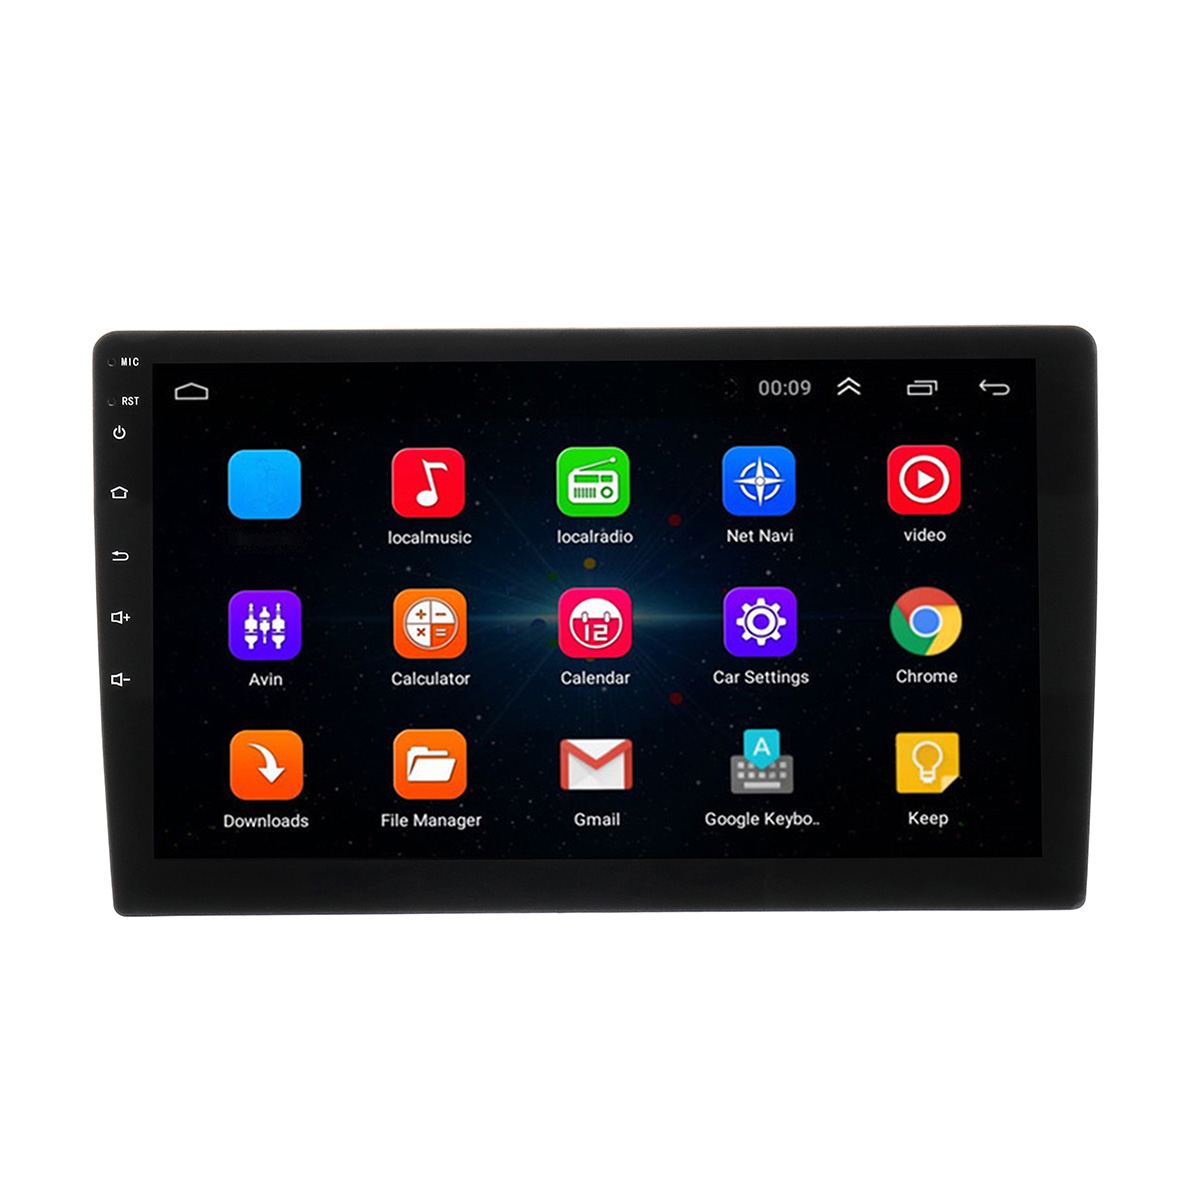 10.1 Inch Car Stereo Radio Multimedia Player Touch Screen GPS Wifi Bluetooth FM AM DSP for Android 8.1 1 Din 4 Core 1+16G - Auto GoShop